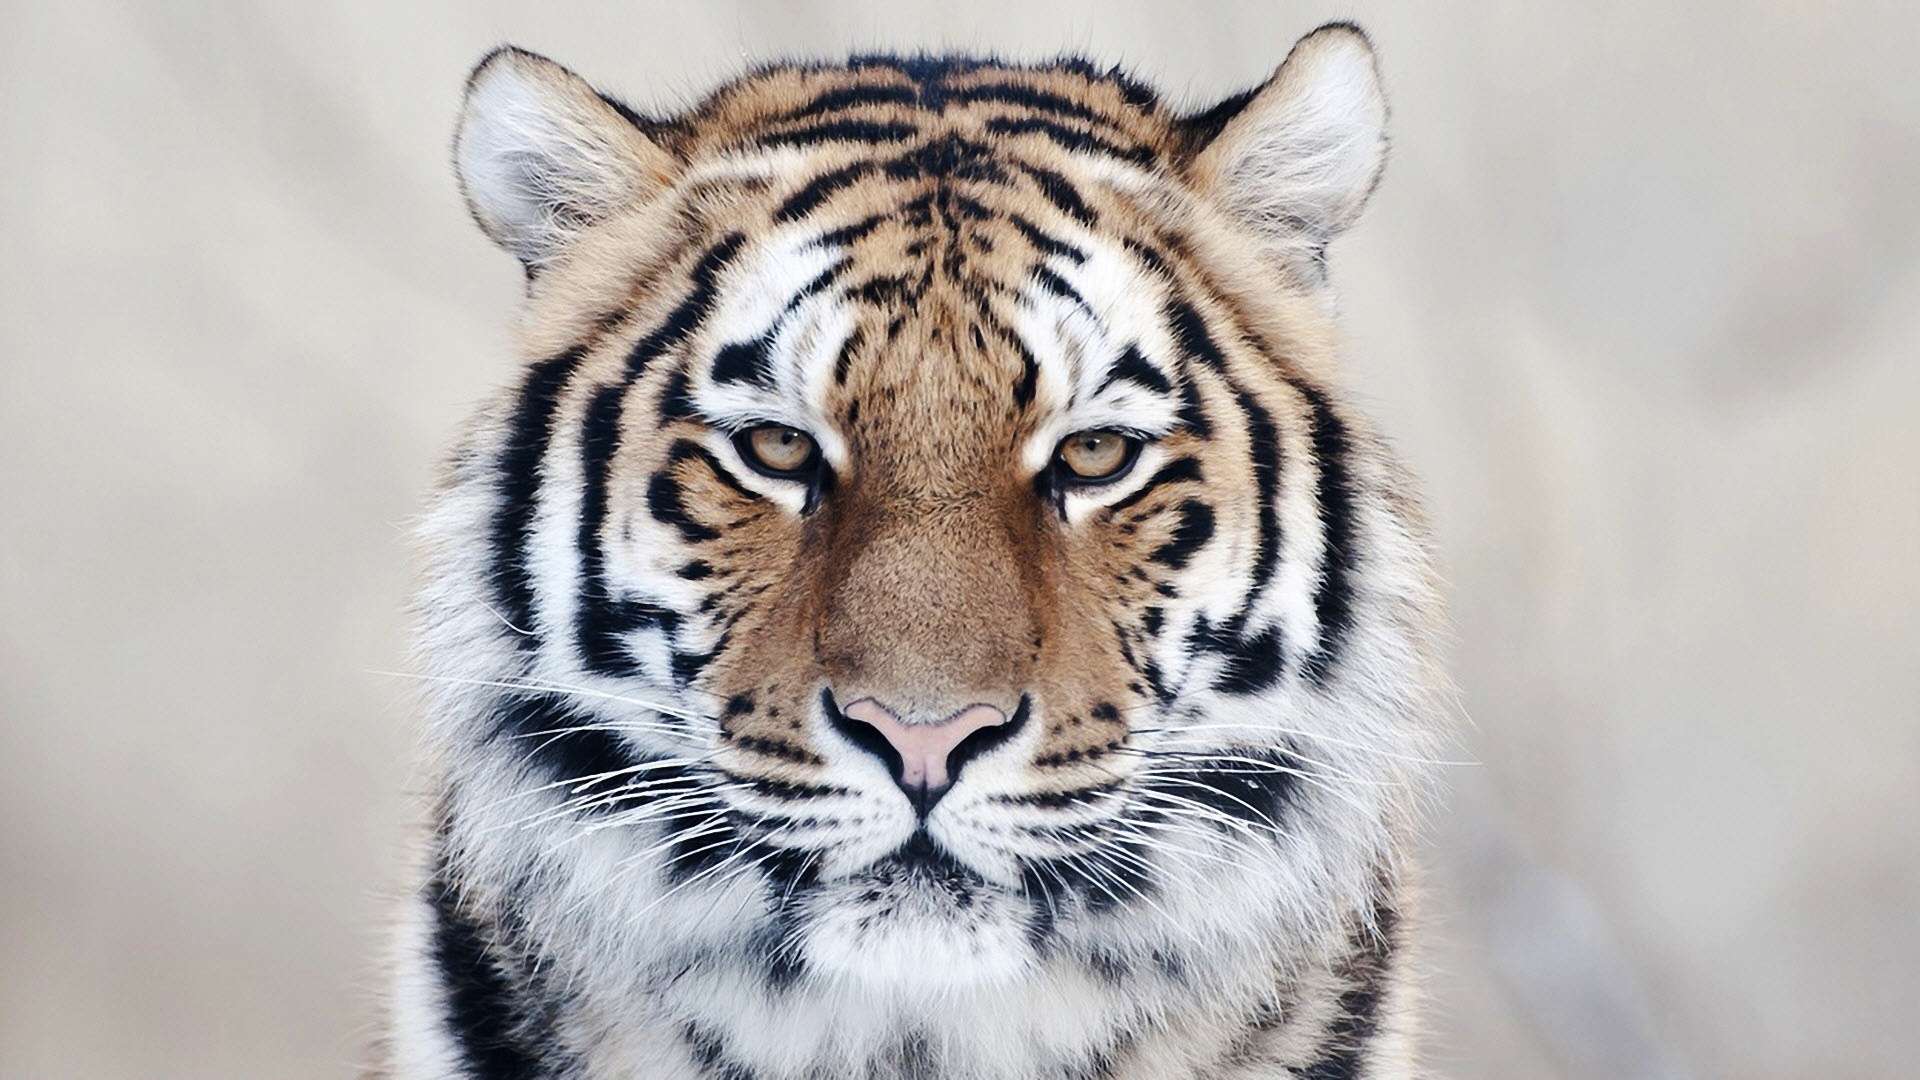 Tiger Face Wallpaper HD New Best Collection Of Animal